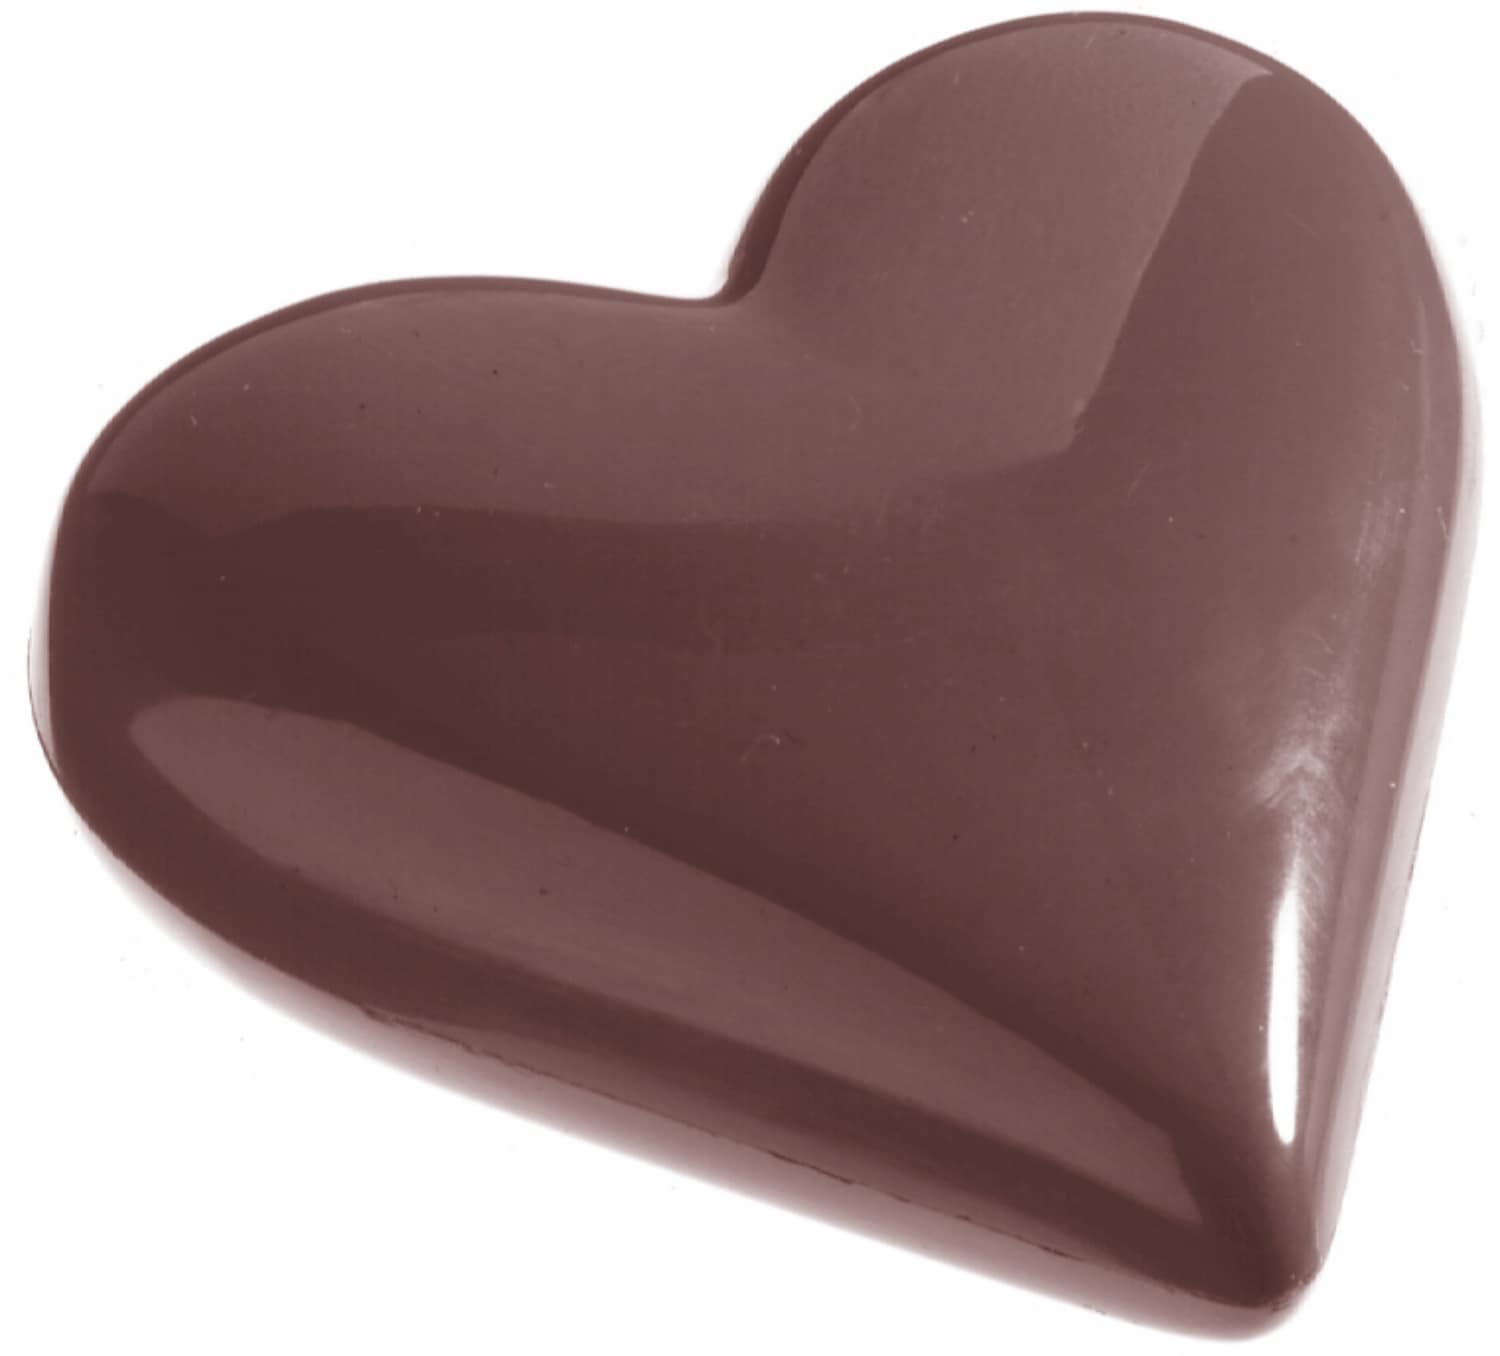 Chocolate mould "heart" 421146